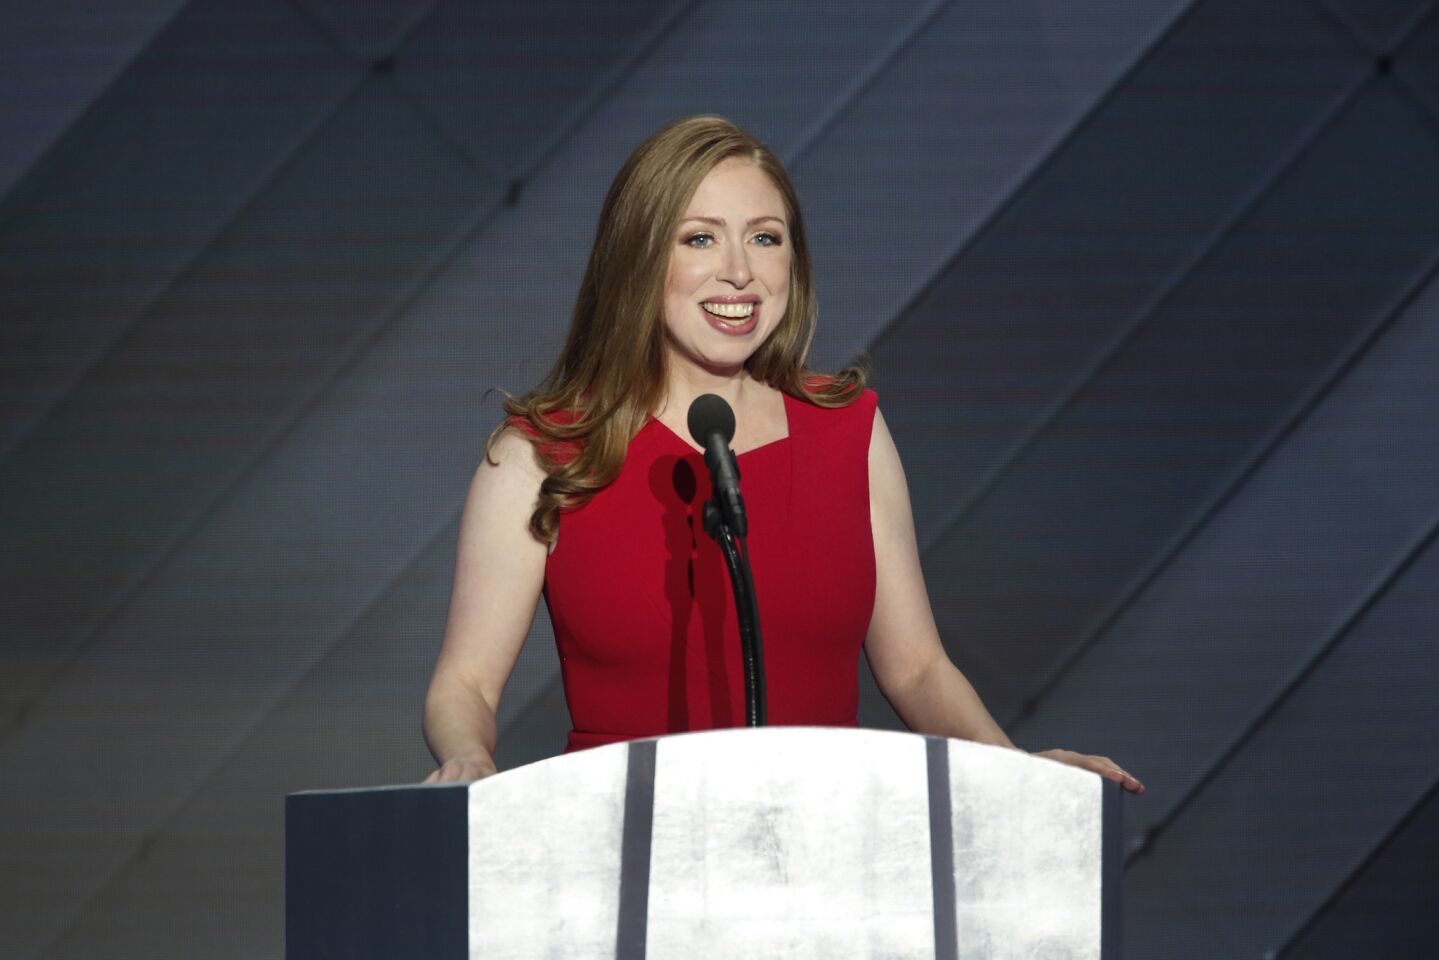 Chelsea Clinton speaks on the final night of the Democratic National Convention in Philadelphia.